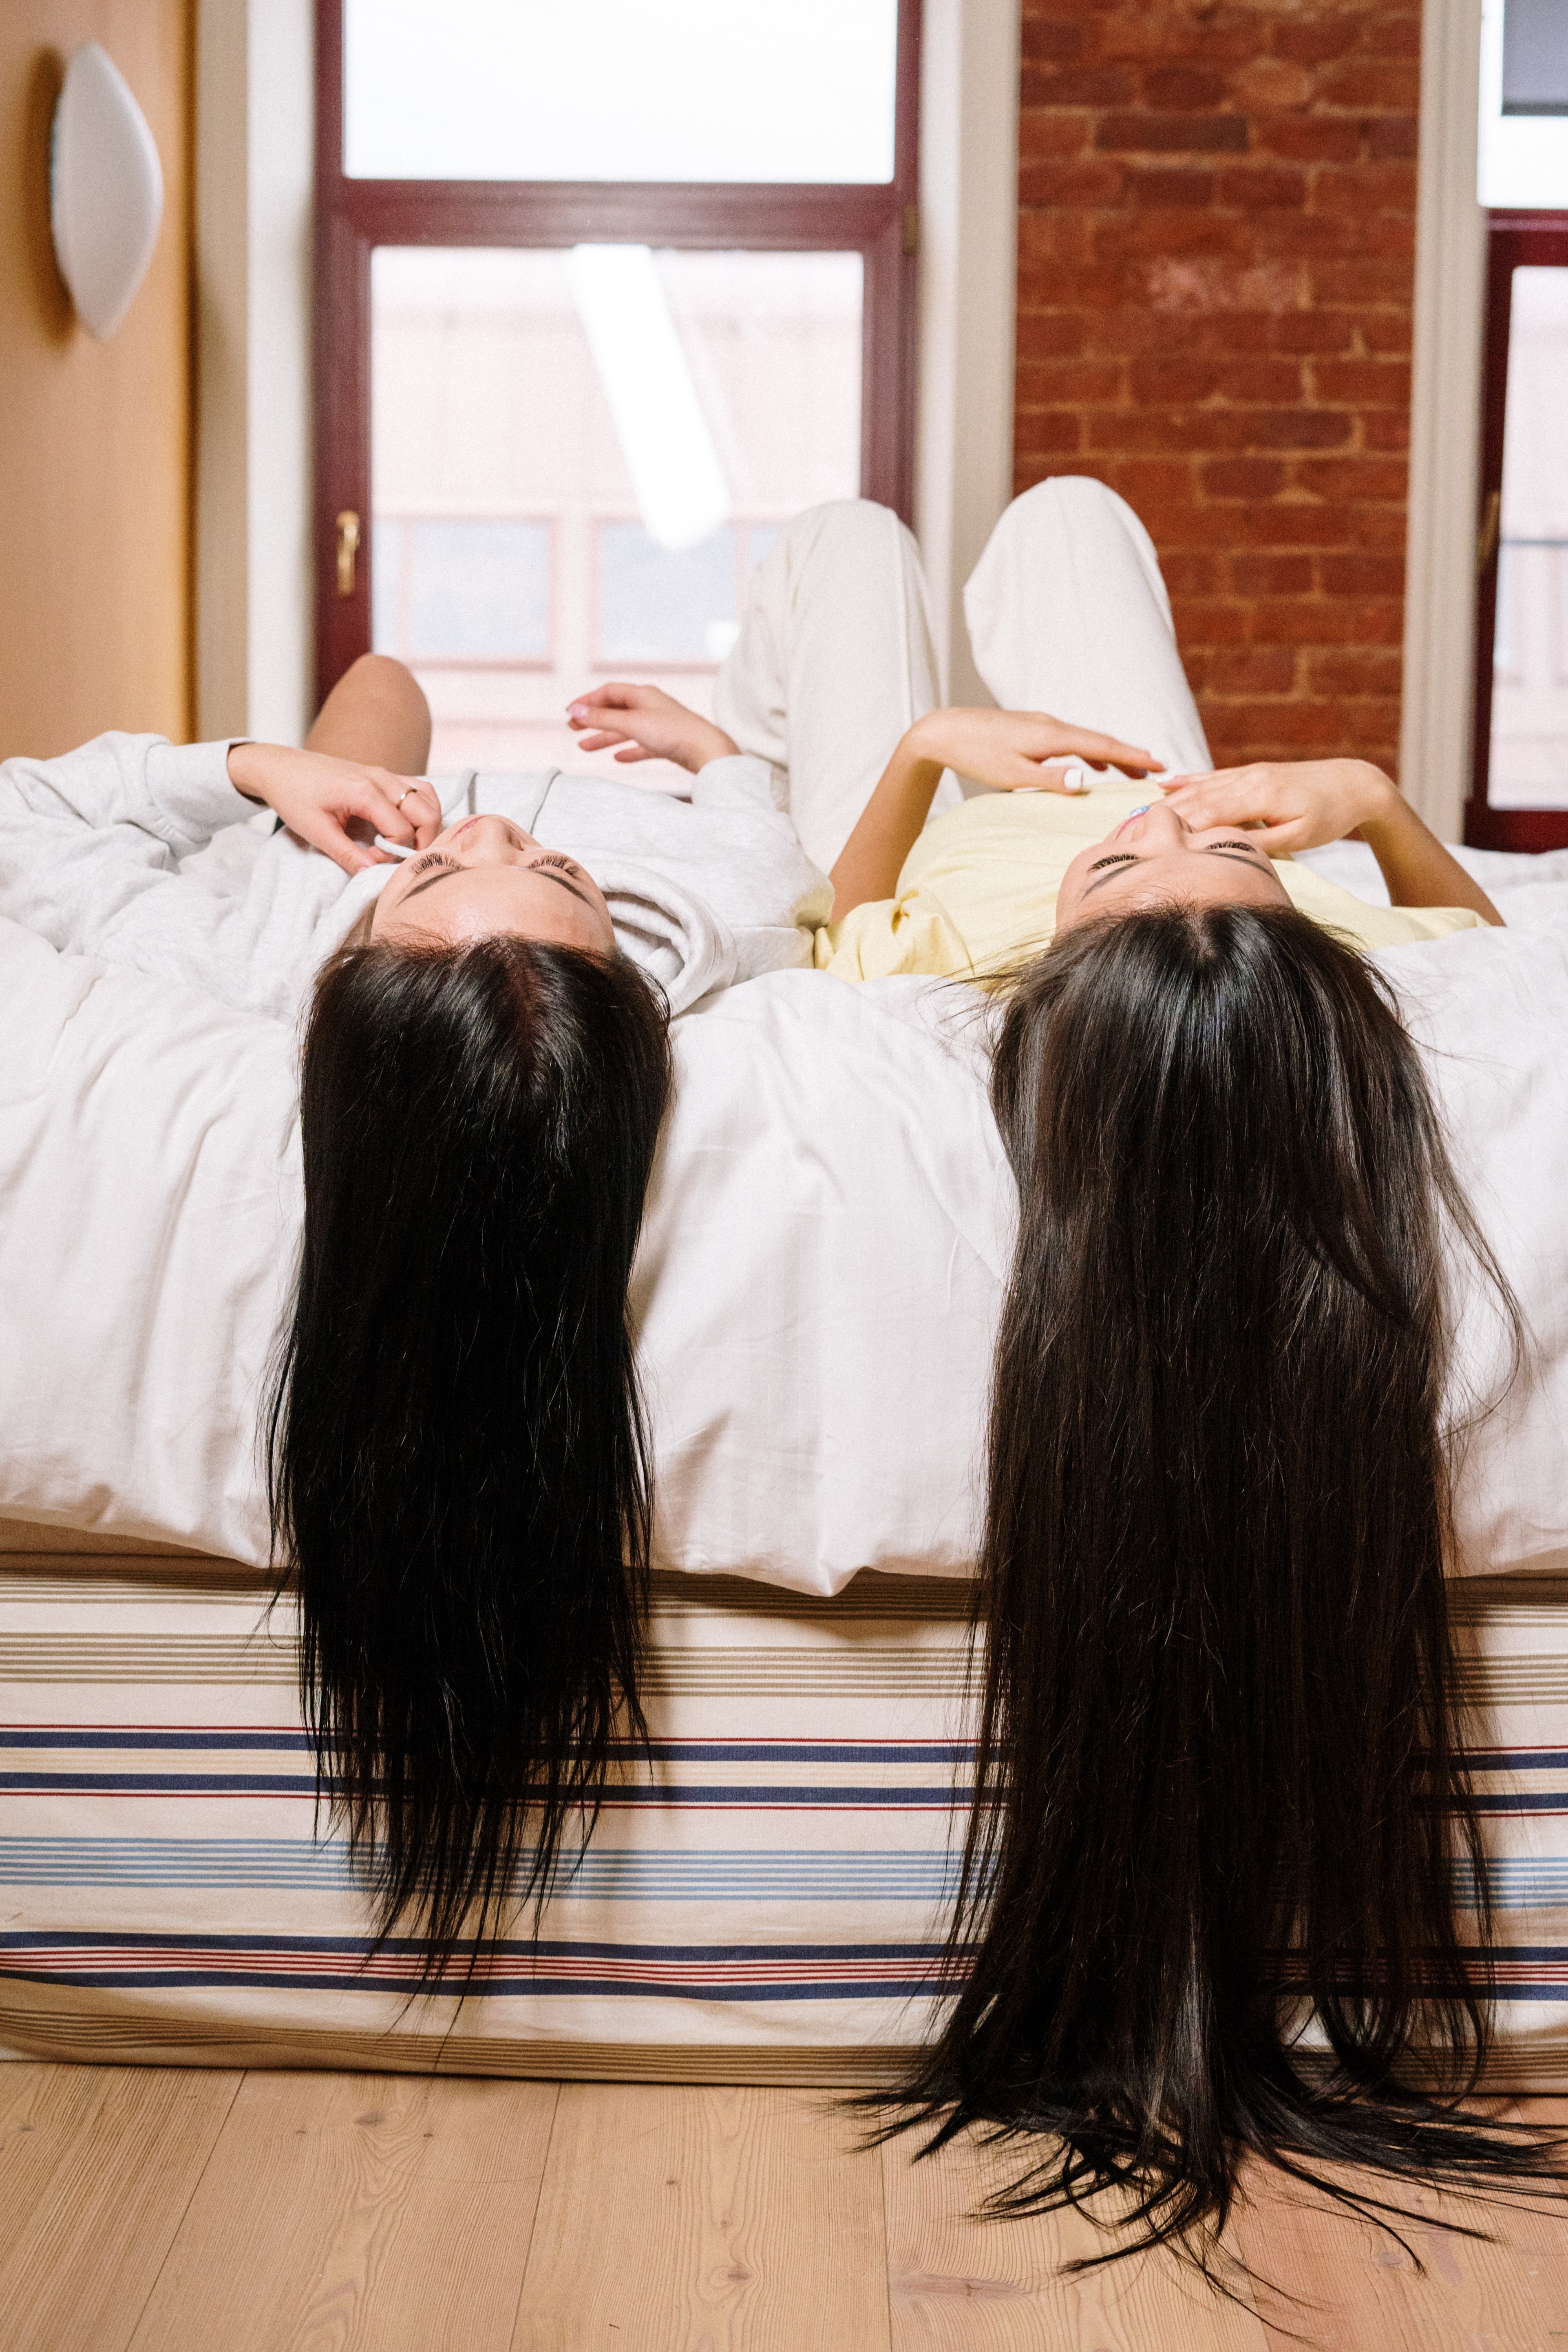 The woman lying on a bed with their hair dangling from the bed | Source: Pexels